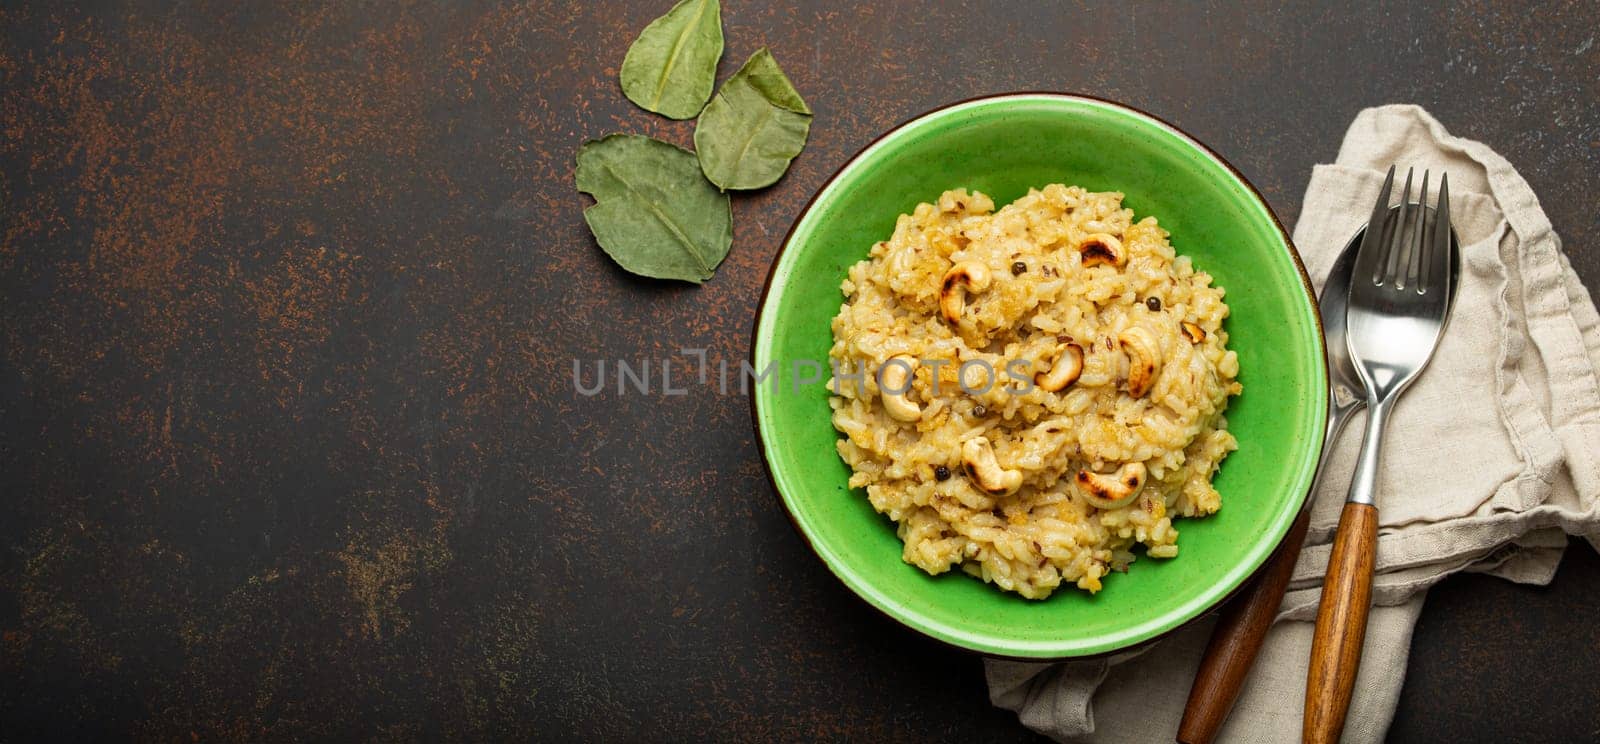 Ven Pongal (Khara Pongal), traditional Indian savoury rice dish made during celebrating Pongal festival, served in bowl top view on concrete rustic background, space for text by its_al_dente